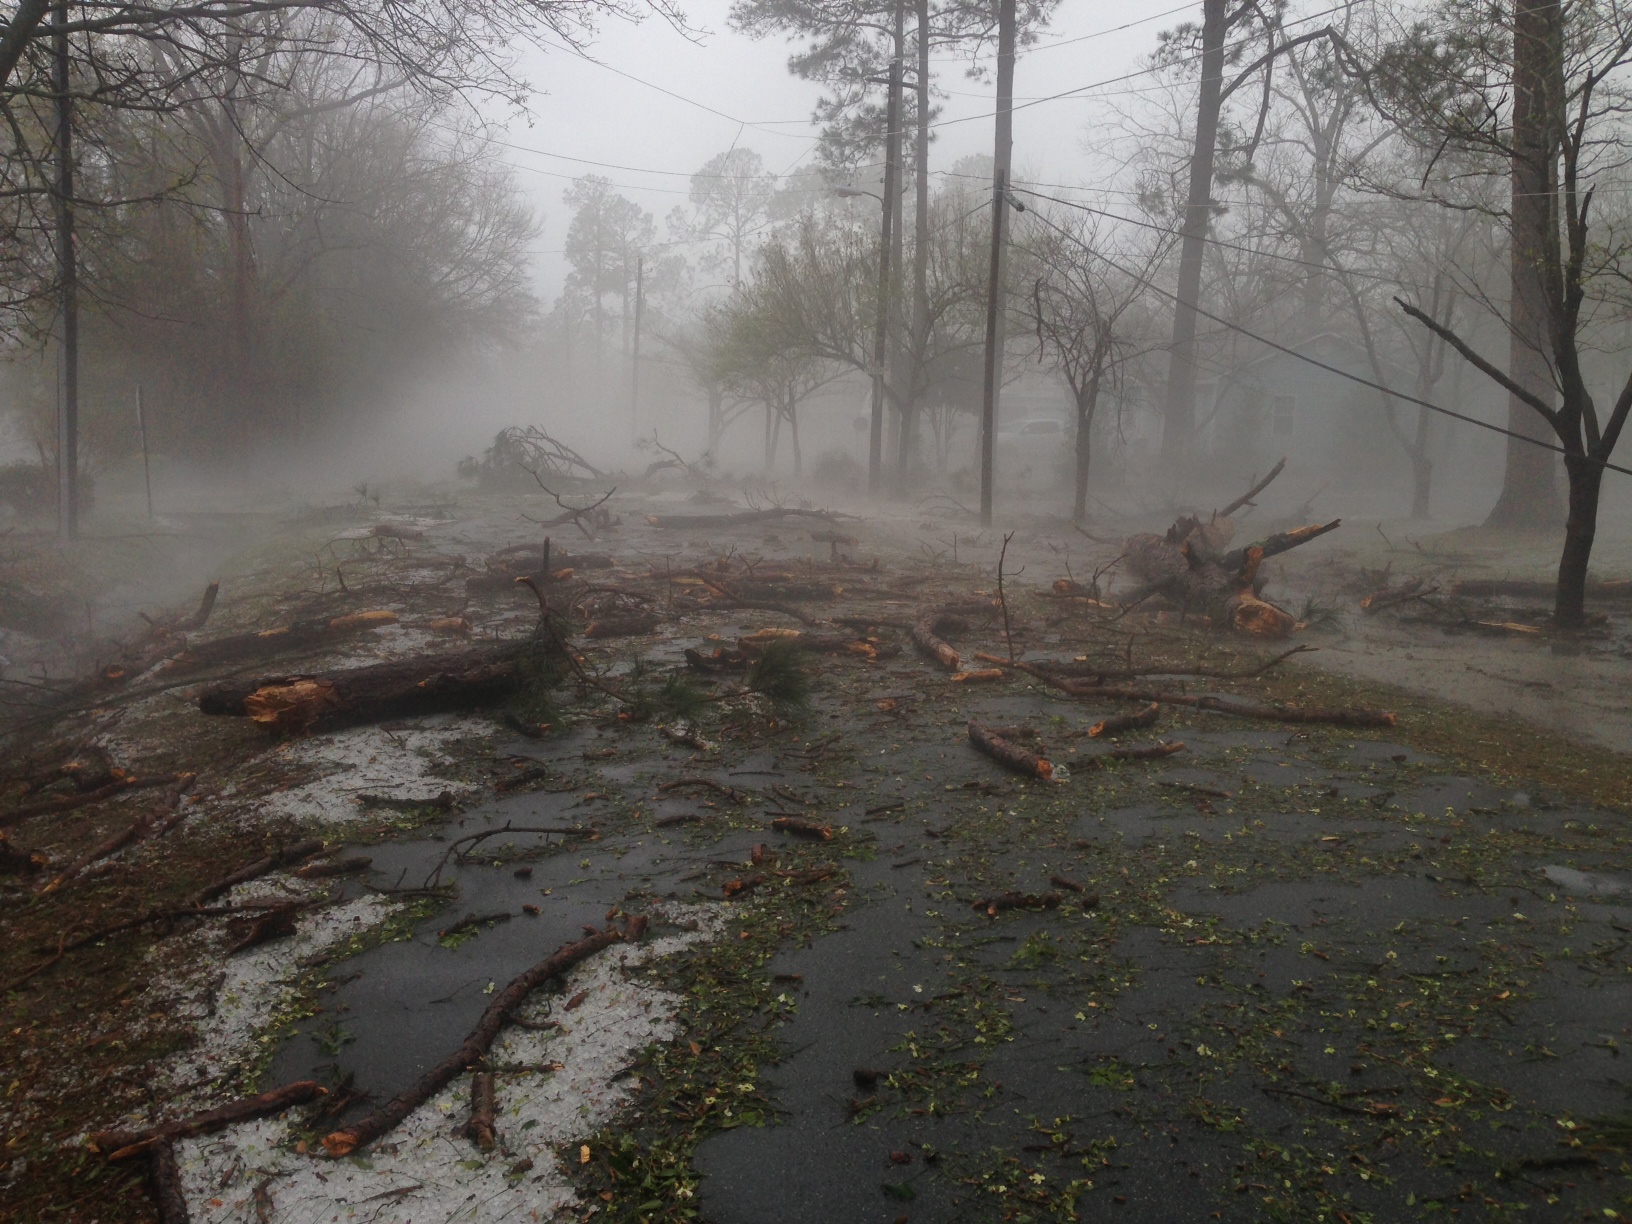 Trees damaged by severe wind gusts in Nashville, GA on March 23, 2013. Fog has developed as melting hail stones cool the nearby air to saturation.